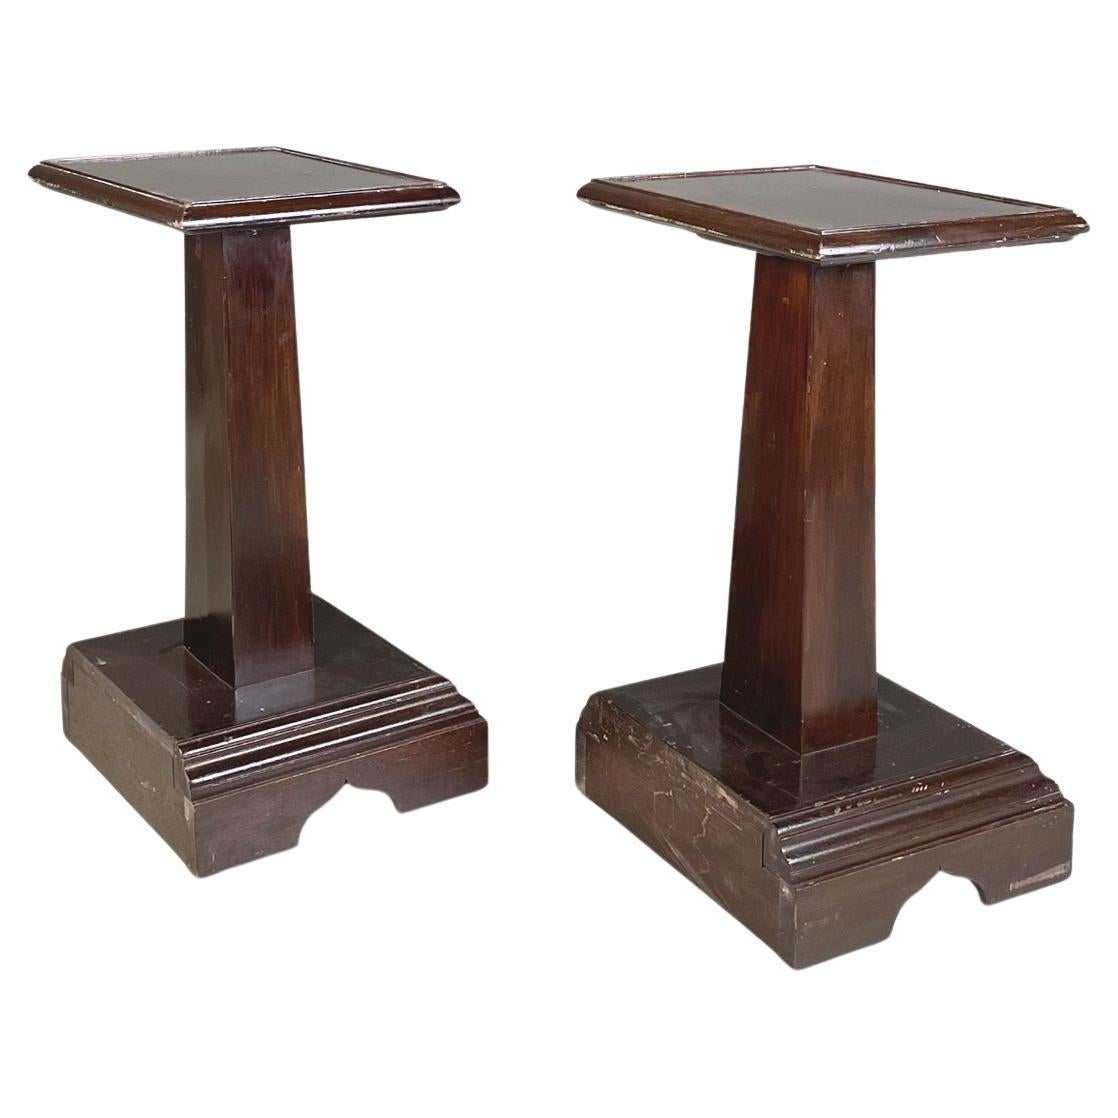 Italian Antique Wooden Side Tables or Pedestals, Early 1900s